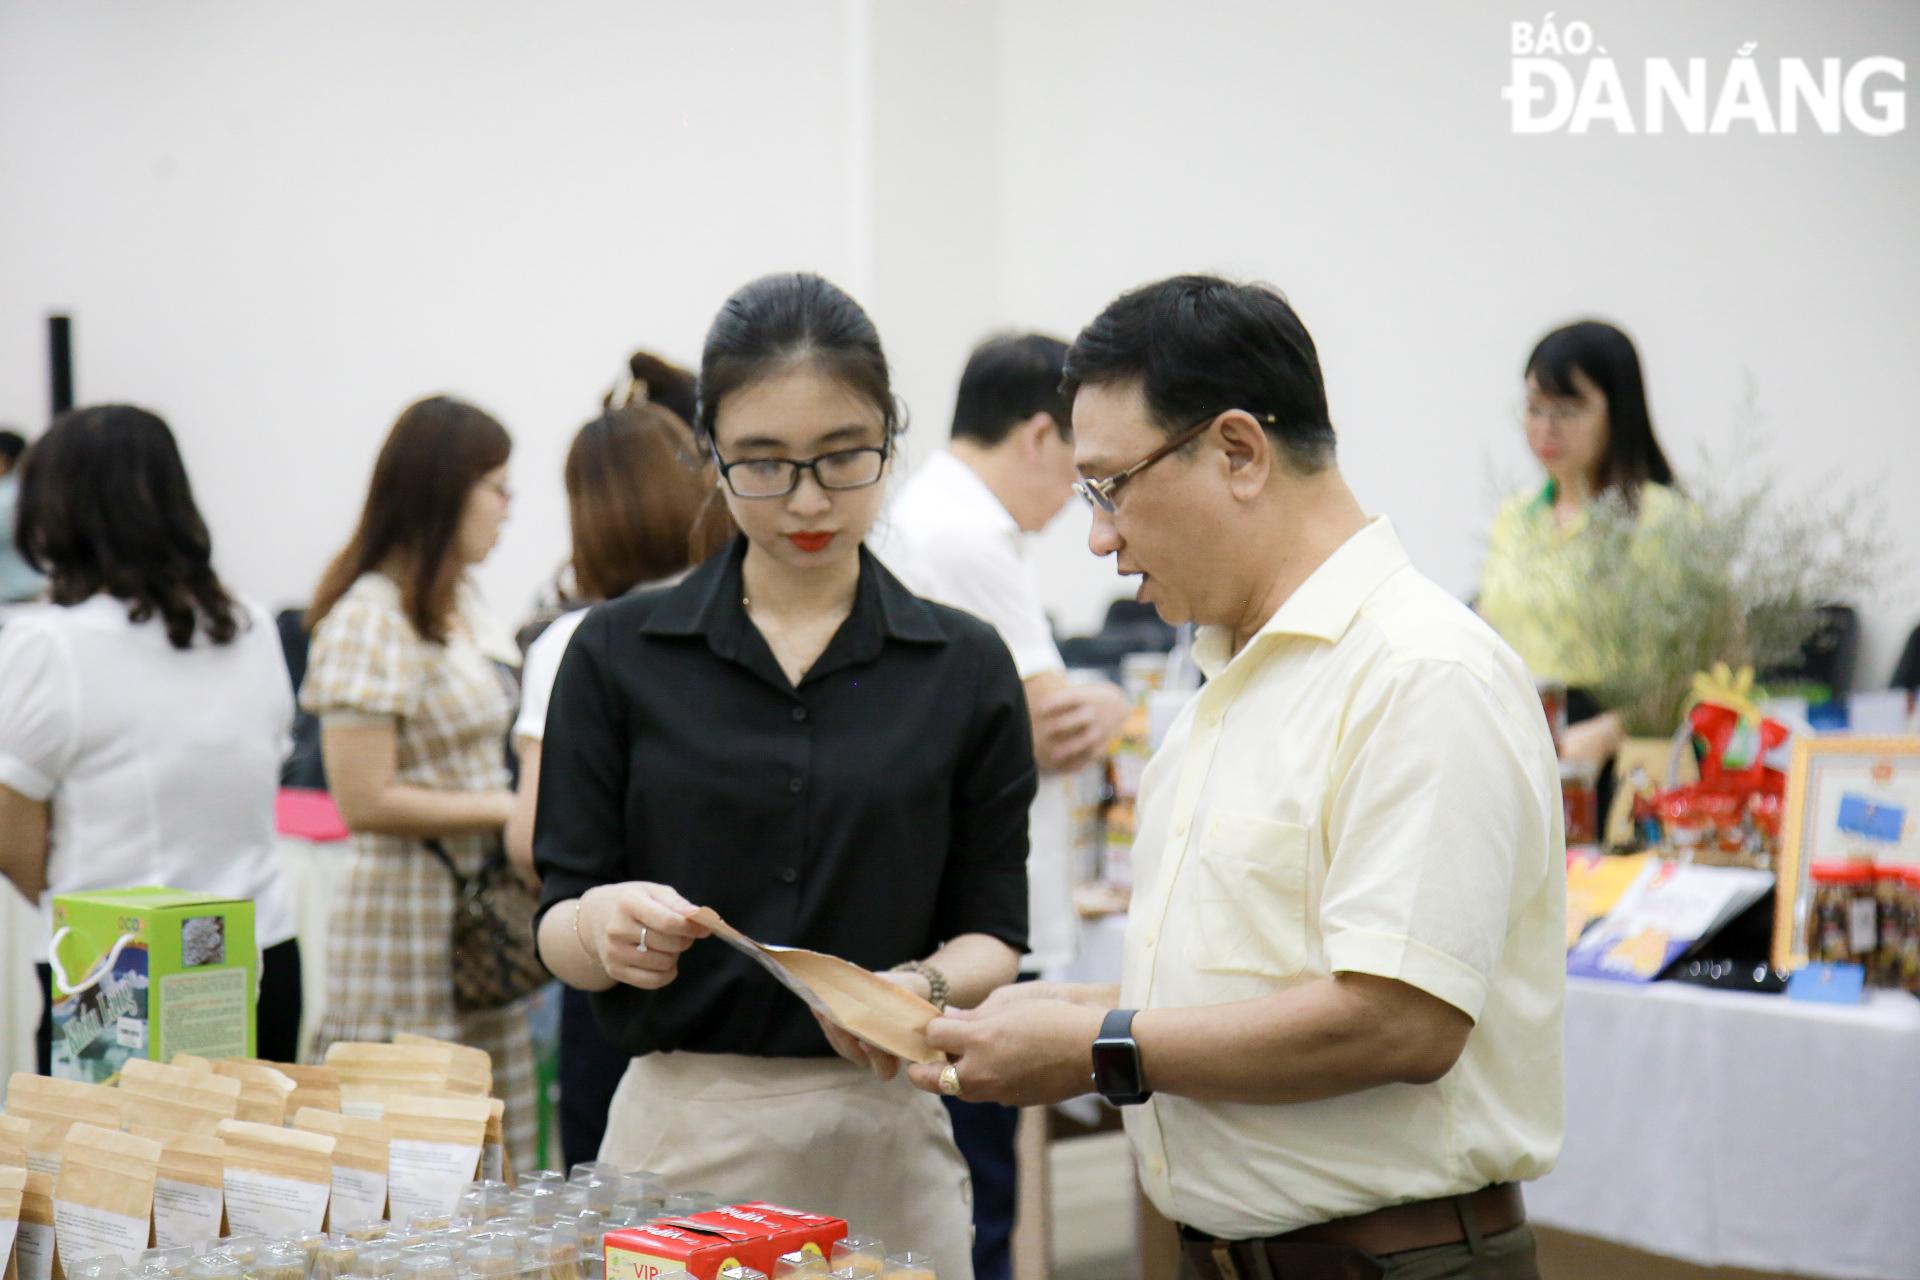 Representatives of cooperatives and businesses visit the OCOP Da Nang booth